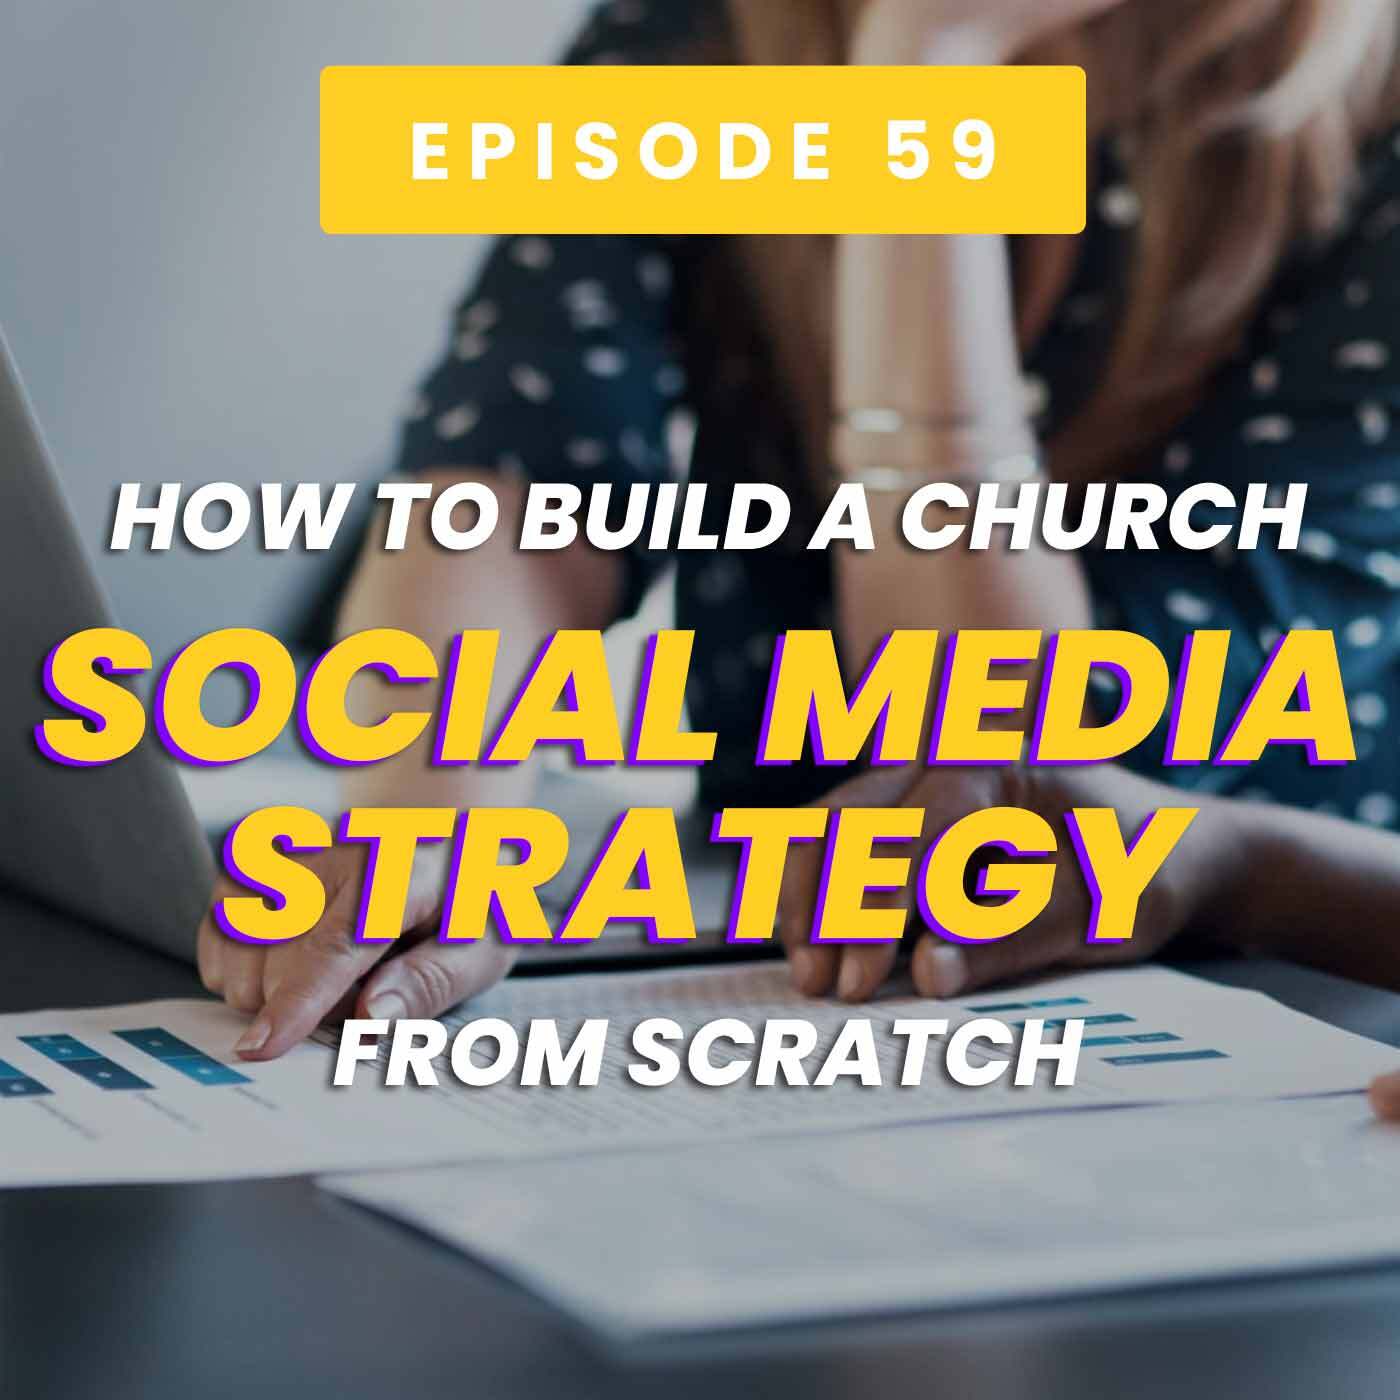 How To Build A Church Social Media Strategy From Scratch REACHRIGHT